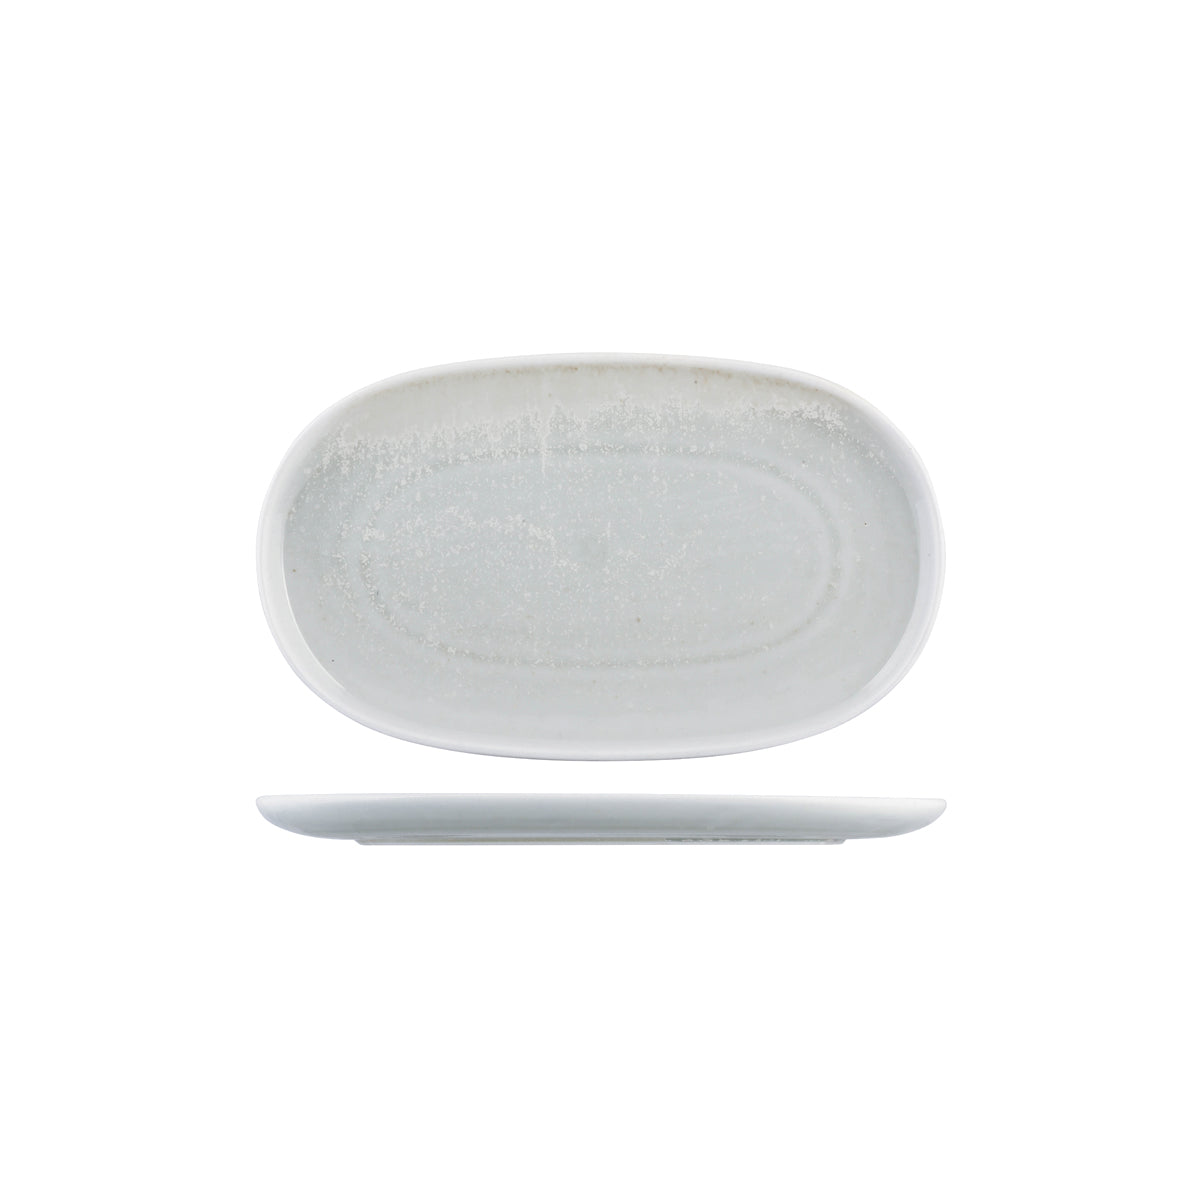 Oval Coupe Plate - 300x180mm, Willow, Moda Porcelain from Moda Porcelain. made out of Porcelain and sold in boxes of 6. Hospitality quality at wholesale price with The Flying Fork! 